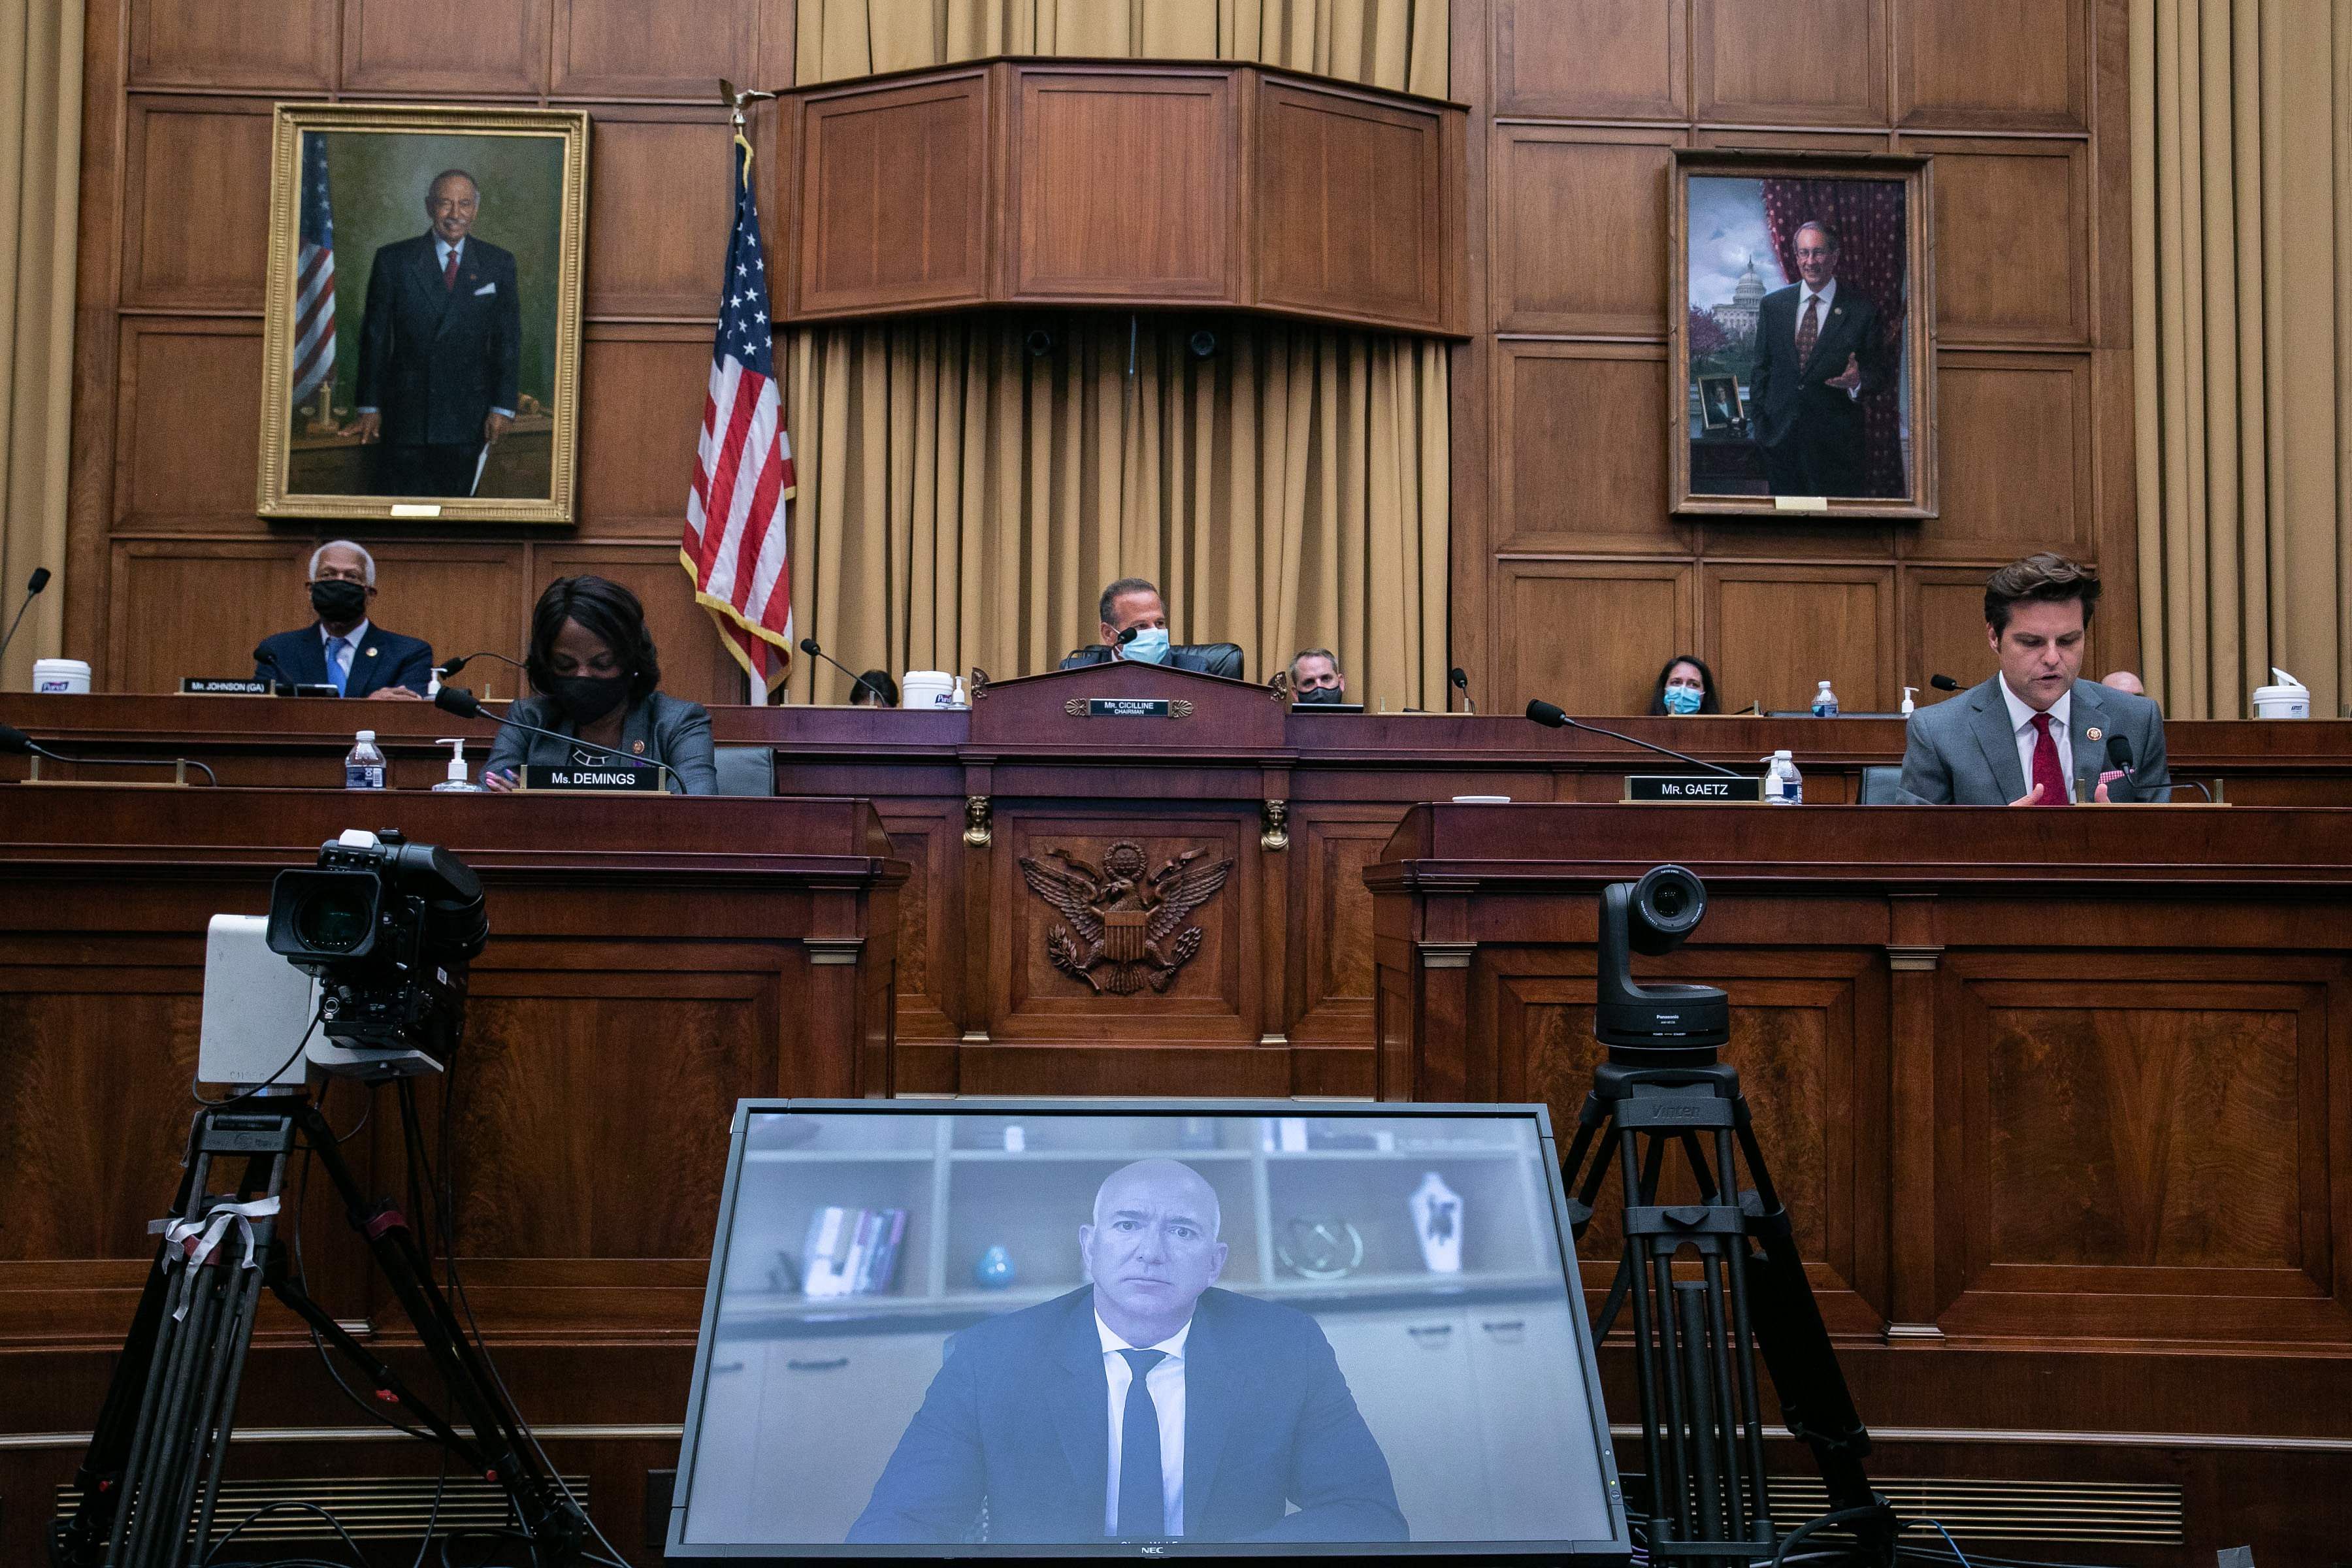 Amazon CEO Jeff Bezos testifies before the House Judiciary Subcommittee on Antitrust, Commercial and Administrative Law hearing on "Online Platforms and Market Power" in the Rayburn House office Building on Capitol Hill in Washington, DC on July 29, 2020. Credit: AFP